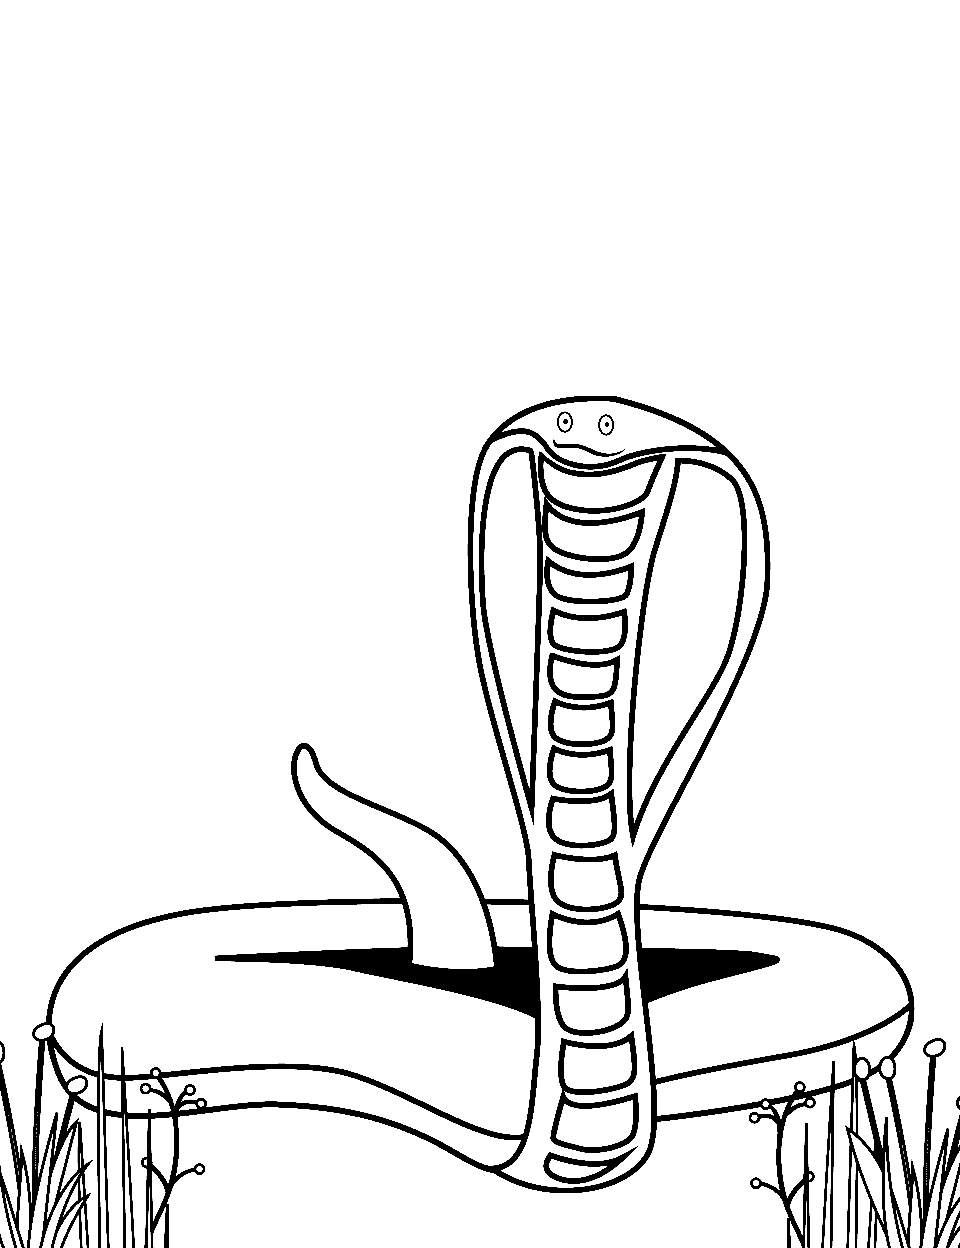 Stretched Out Coloring Page - A long snake in a stretched-out position.